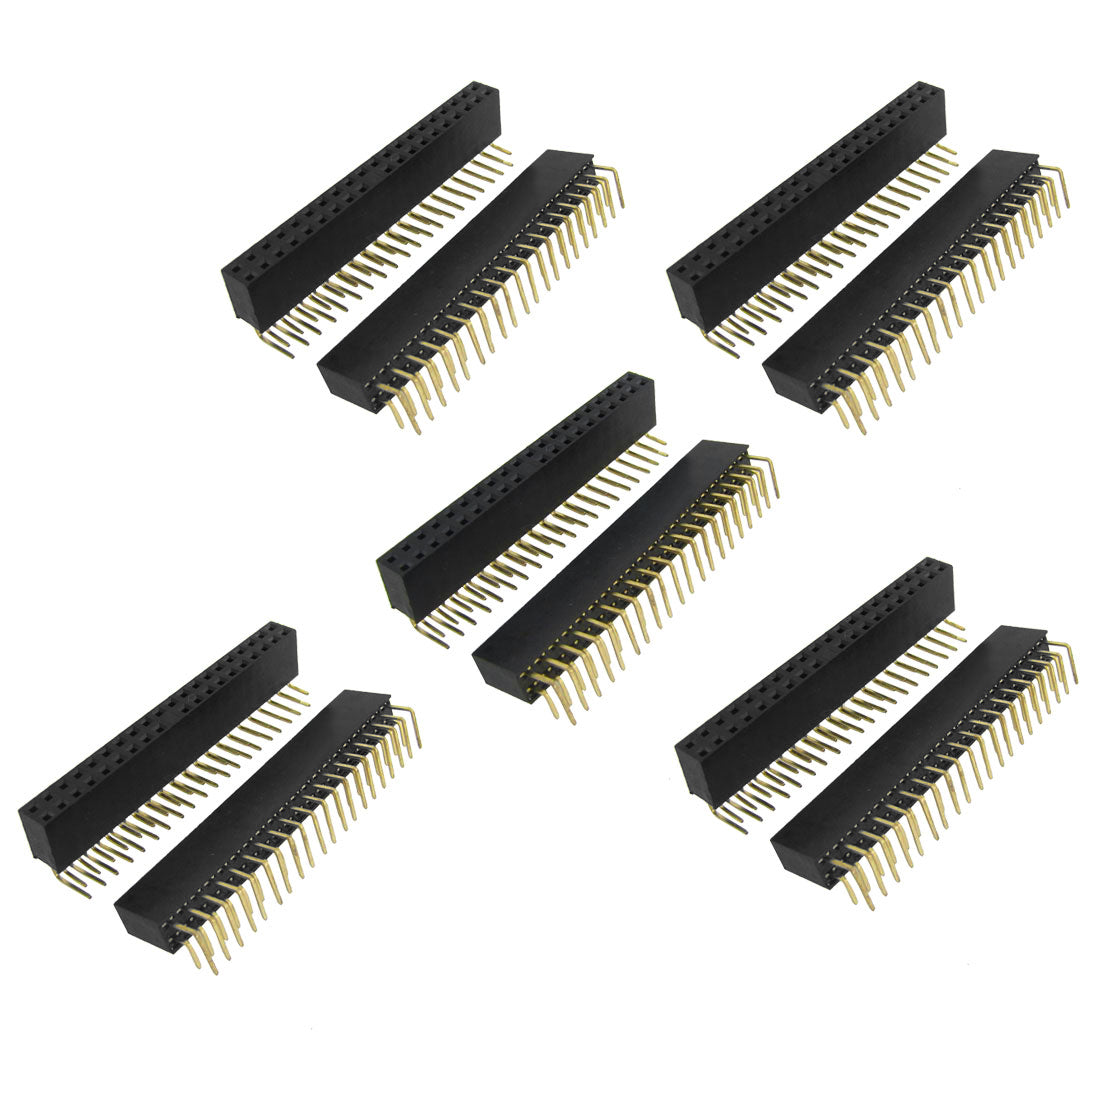 uxcell Uxcell 10 Pcs 2x20 Pin 2.54mm Pitch Dual Row Right Angle Female Pin Headers